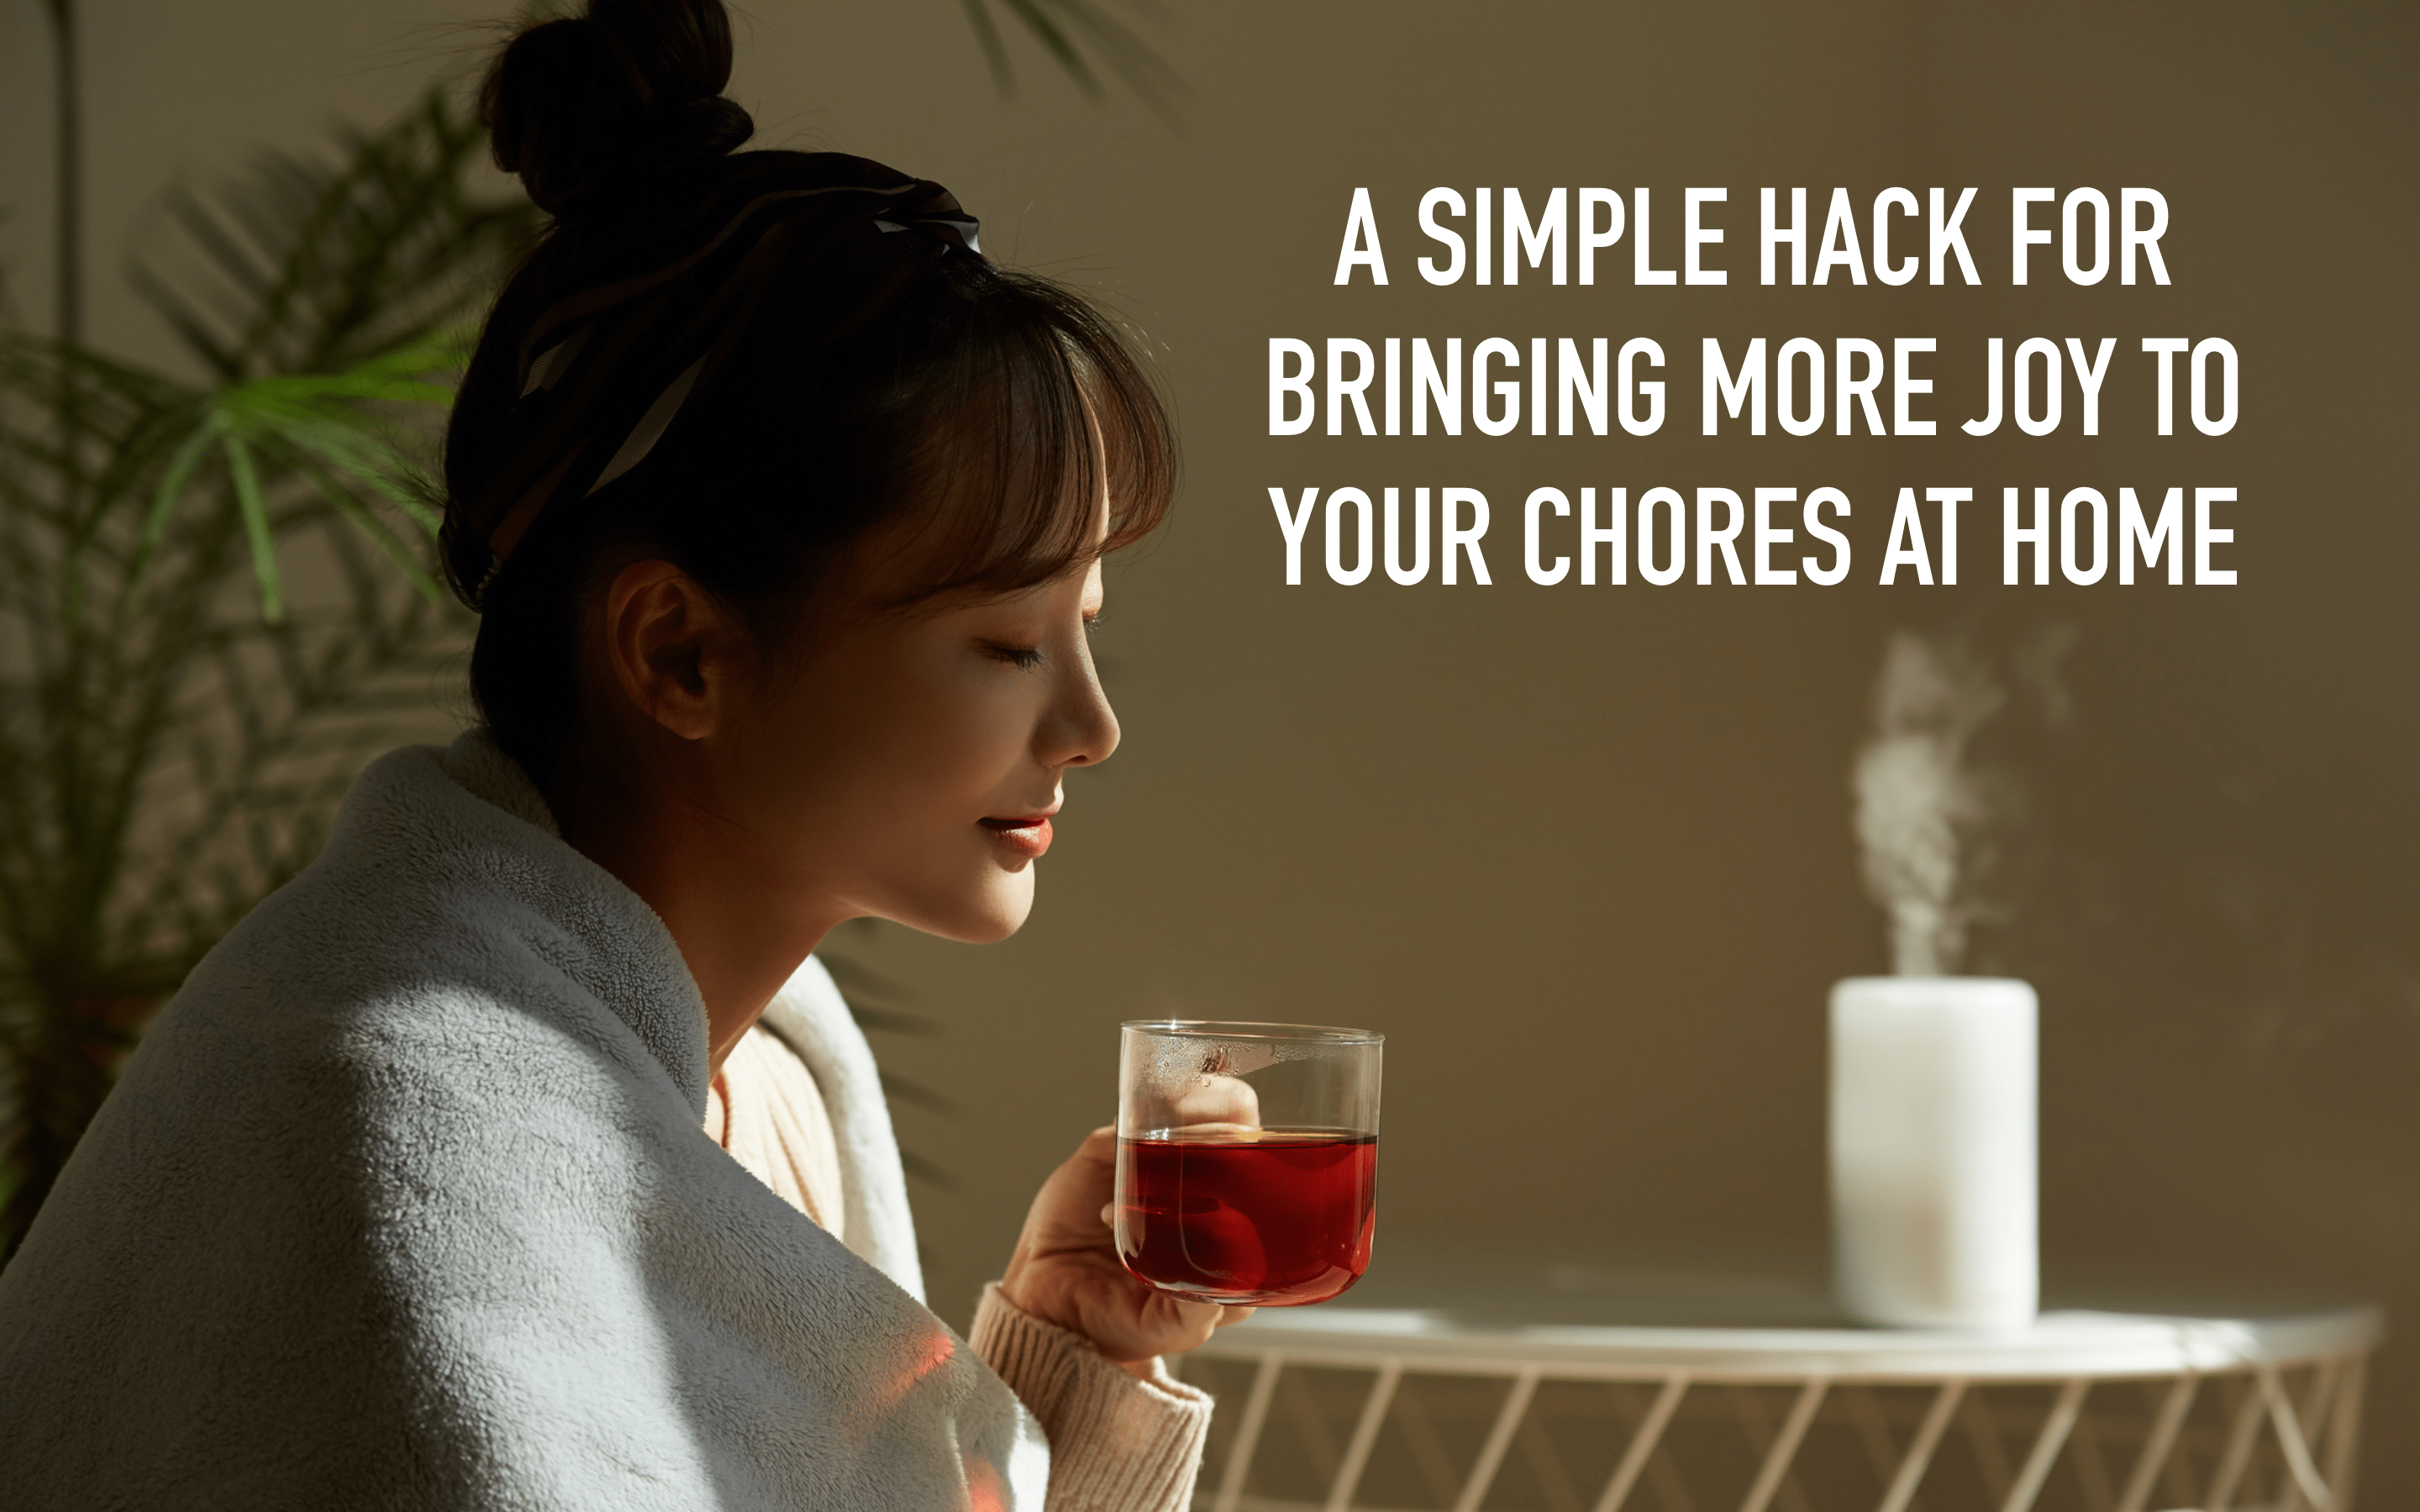 A Simple Hack for Bringing More Joy to Your Chores at Home